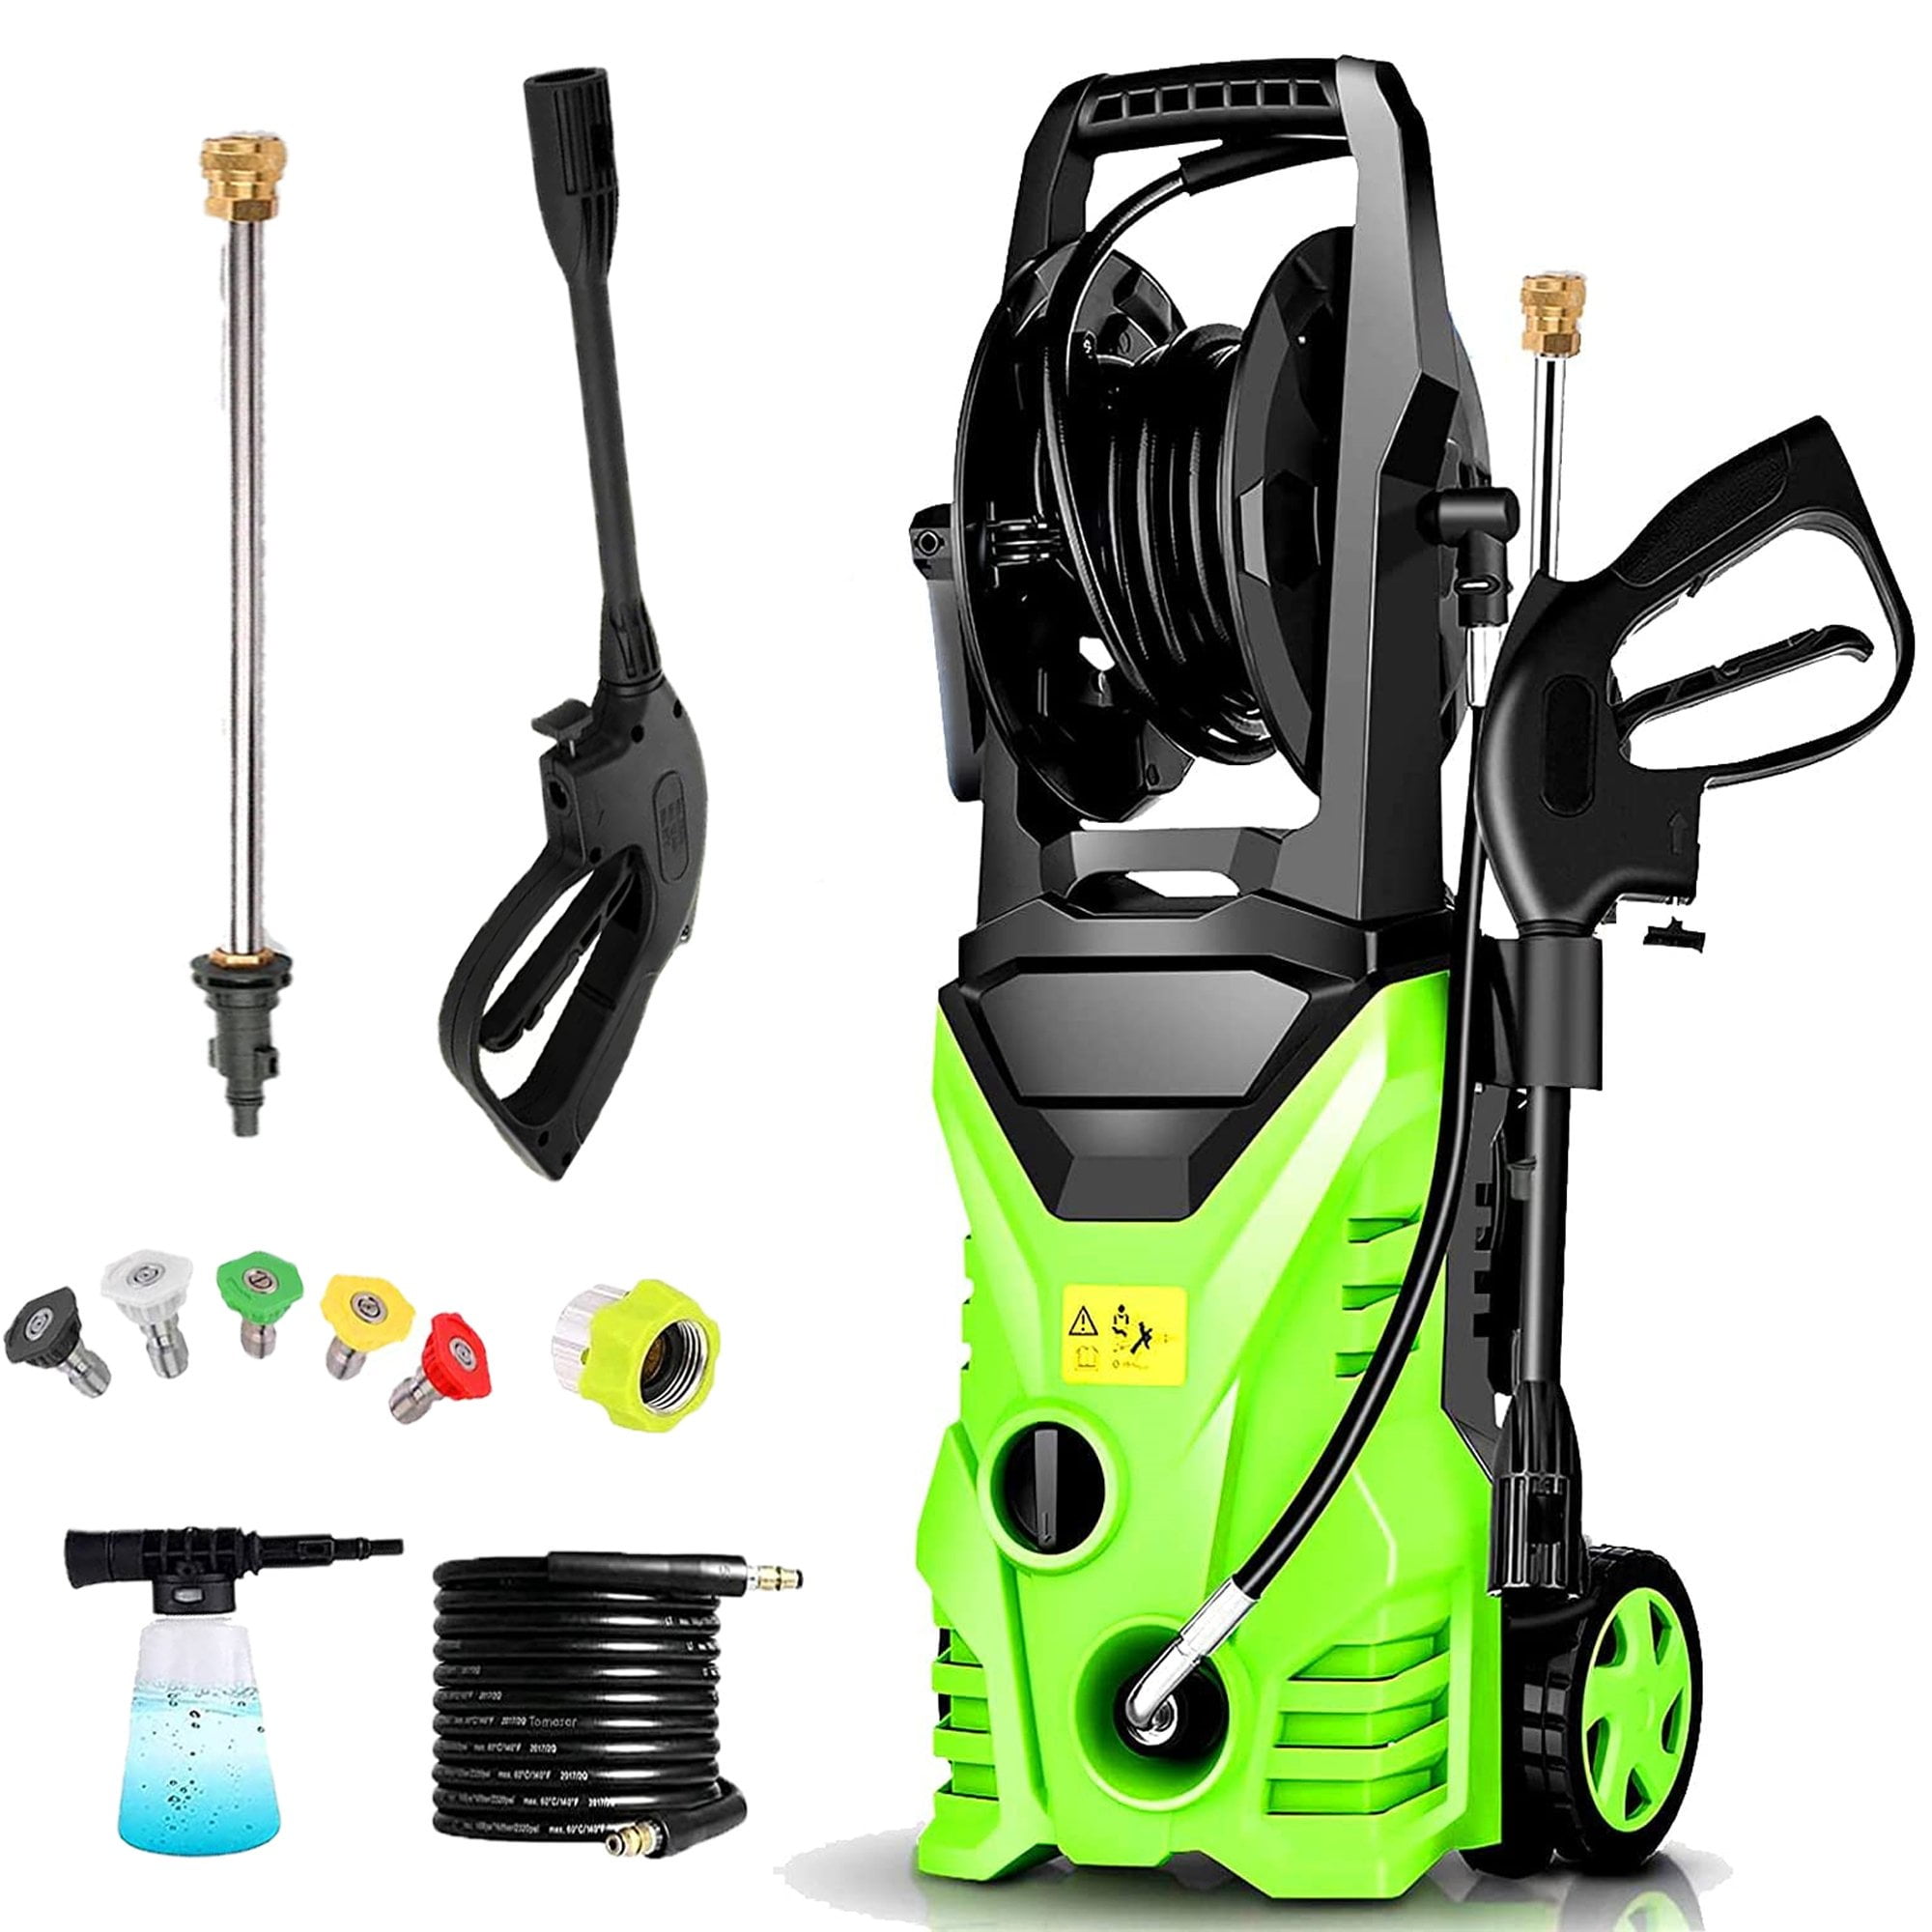 2.6GPM High Pressure Washer Professional Washer Cleaner,4 Nozzles,HM5226 Homdox 3500PSI Electric Pressure Washer 1800W Power Washer 